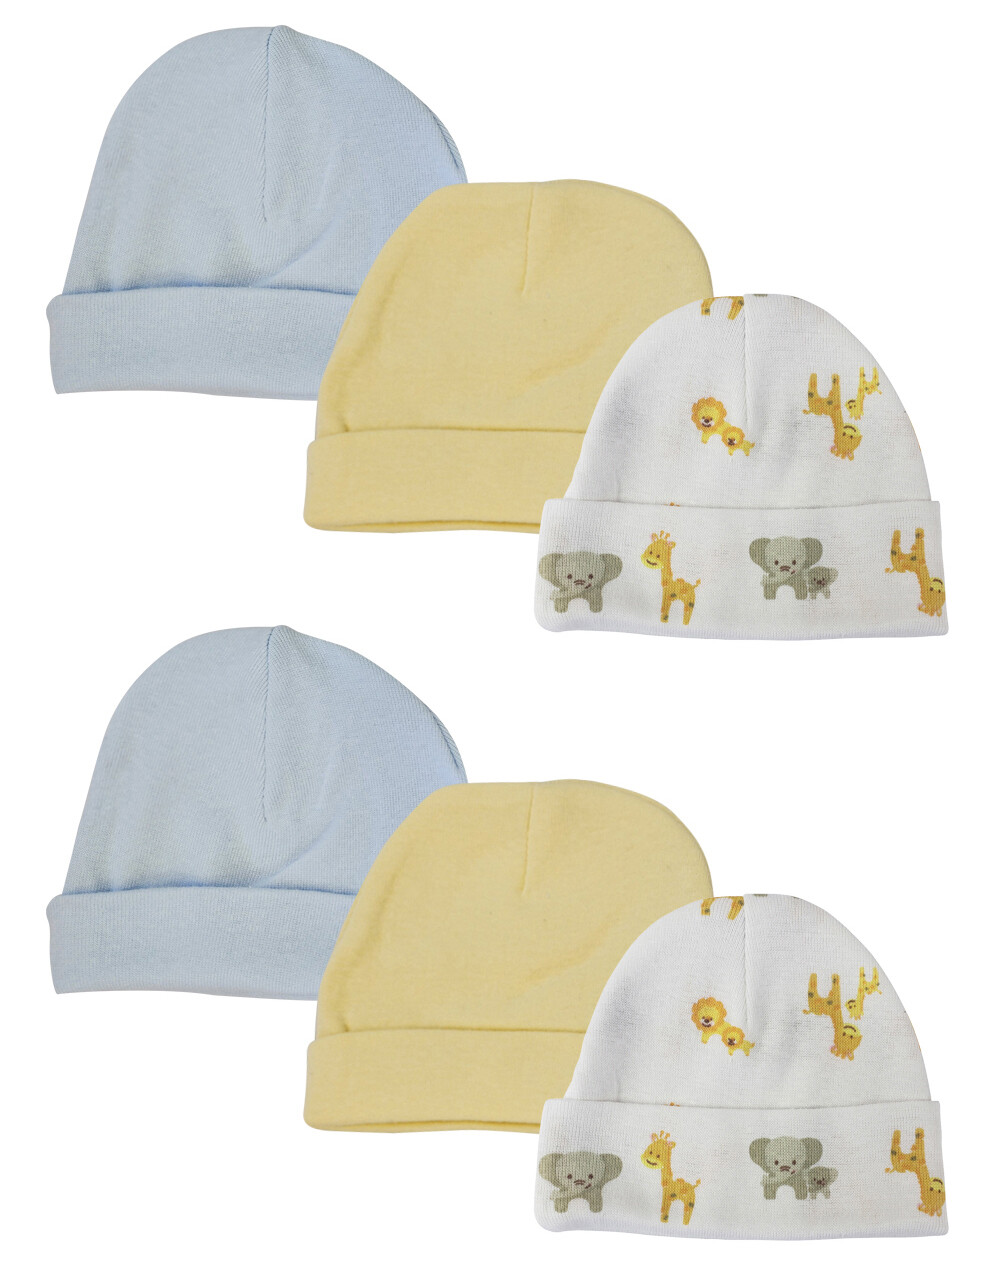 Baby Boys Caps (Pack of 6)